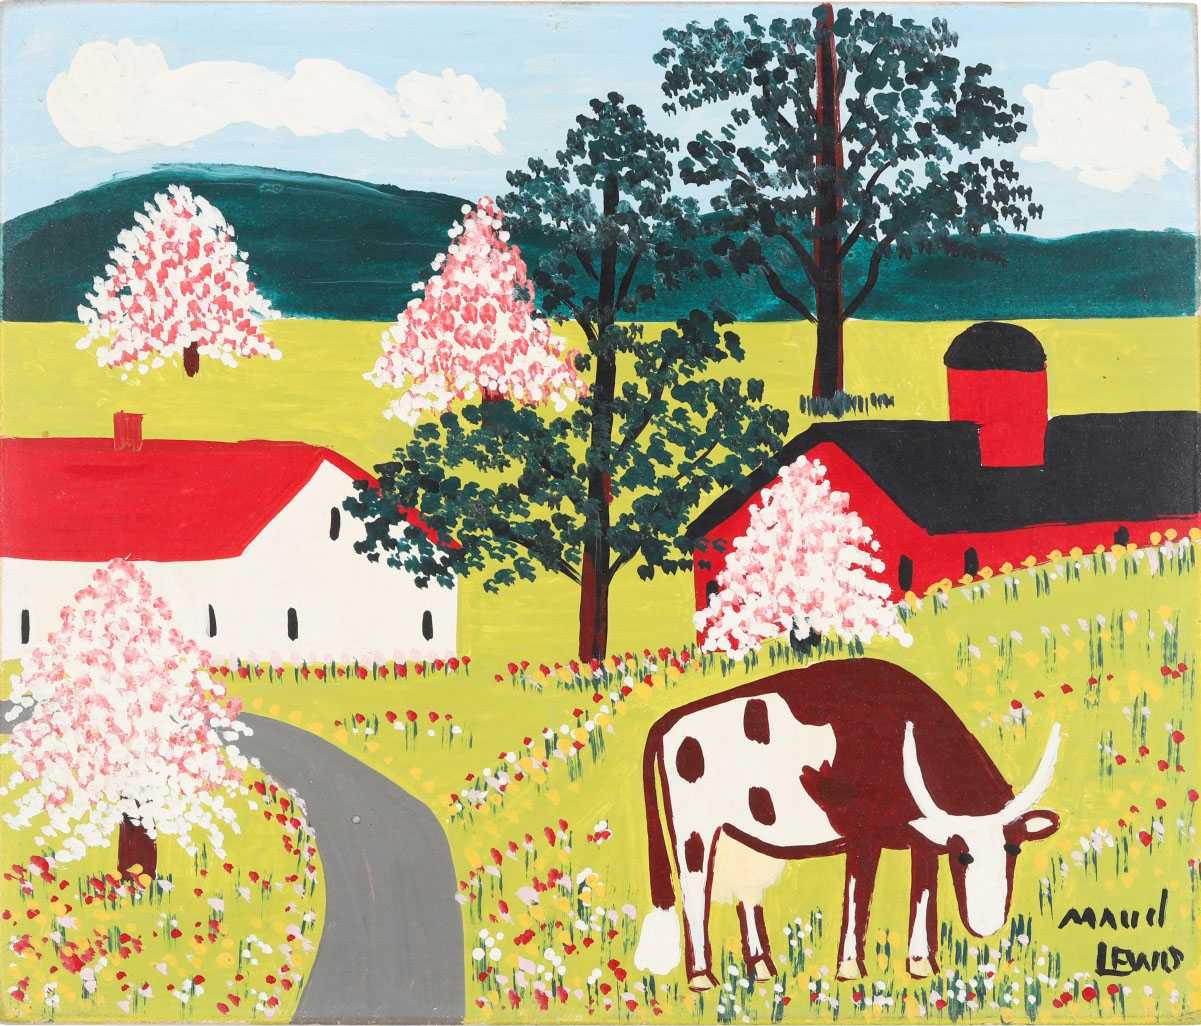 Maud Lewis, 'Cow In Spring Meadow,' estimated at CA$25,000-CA$30,000 ($18,460-$22,150) at Miller & Miller.